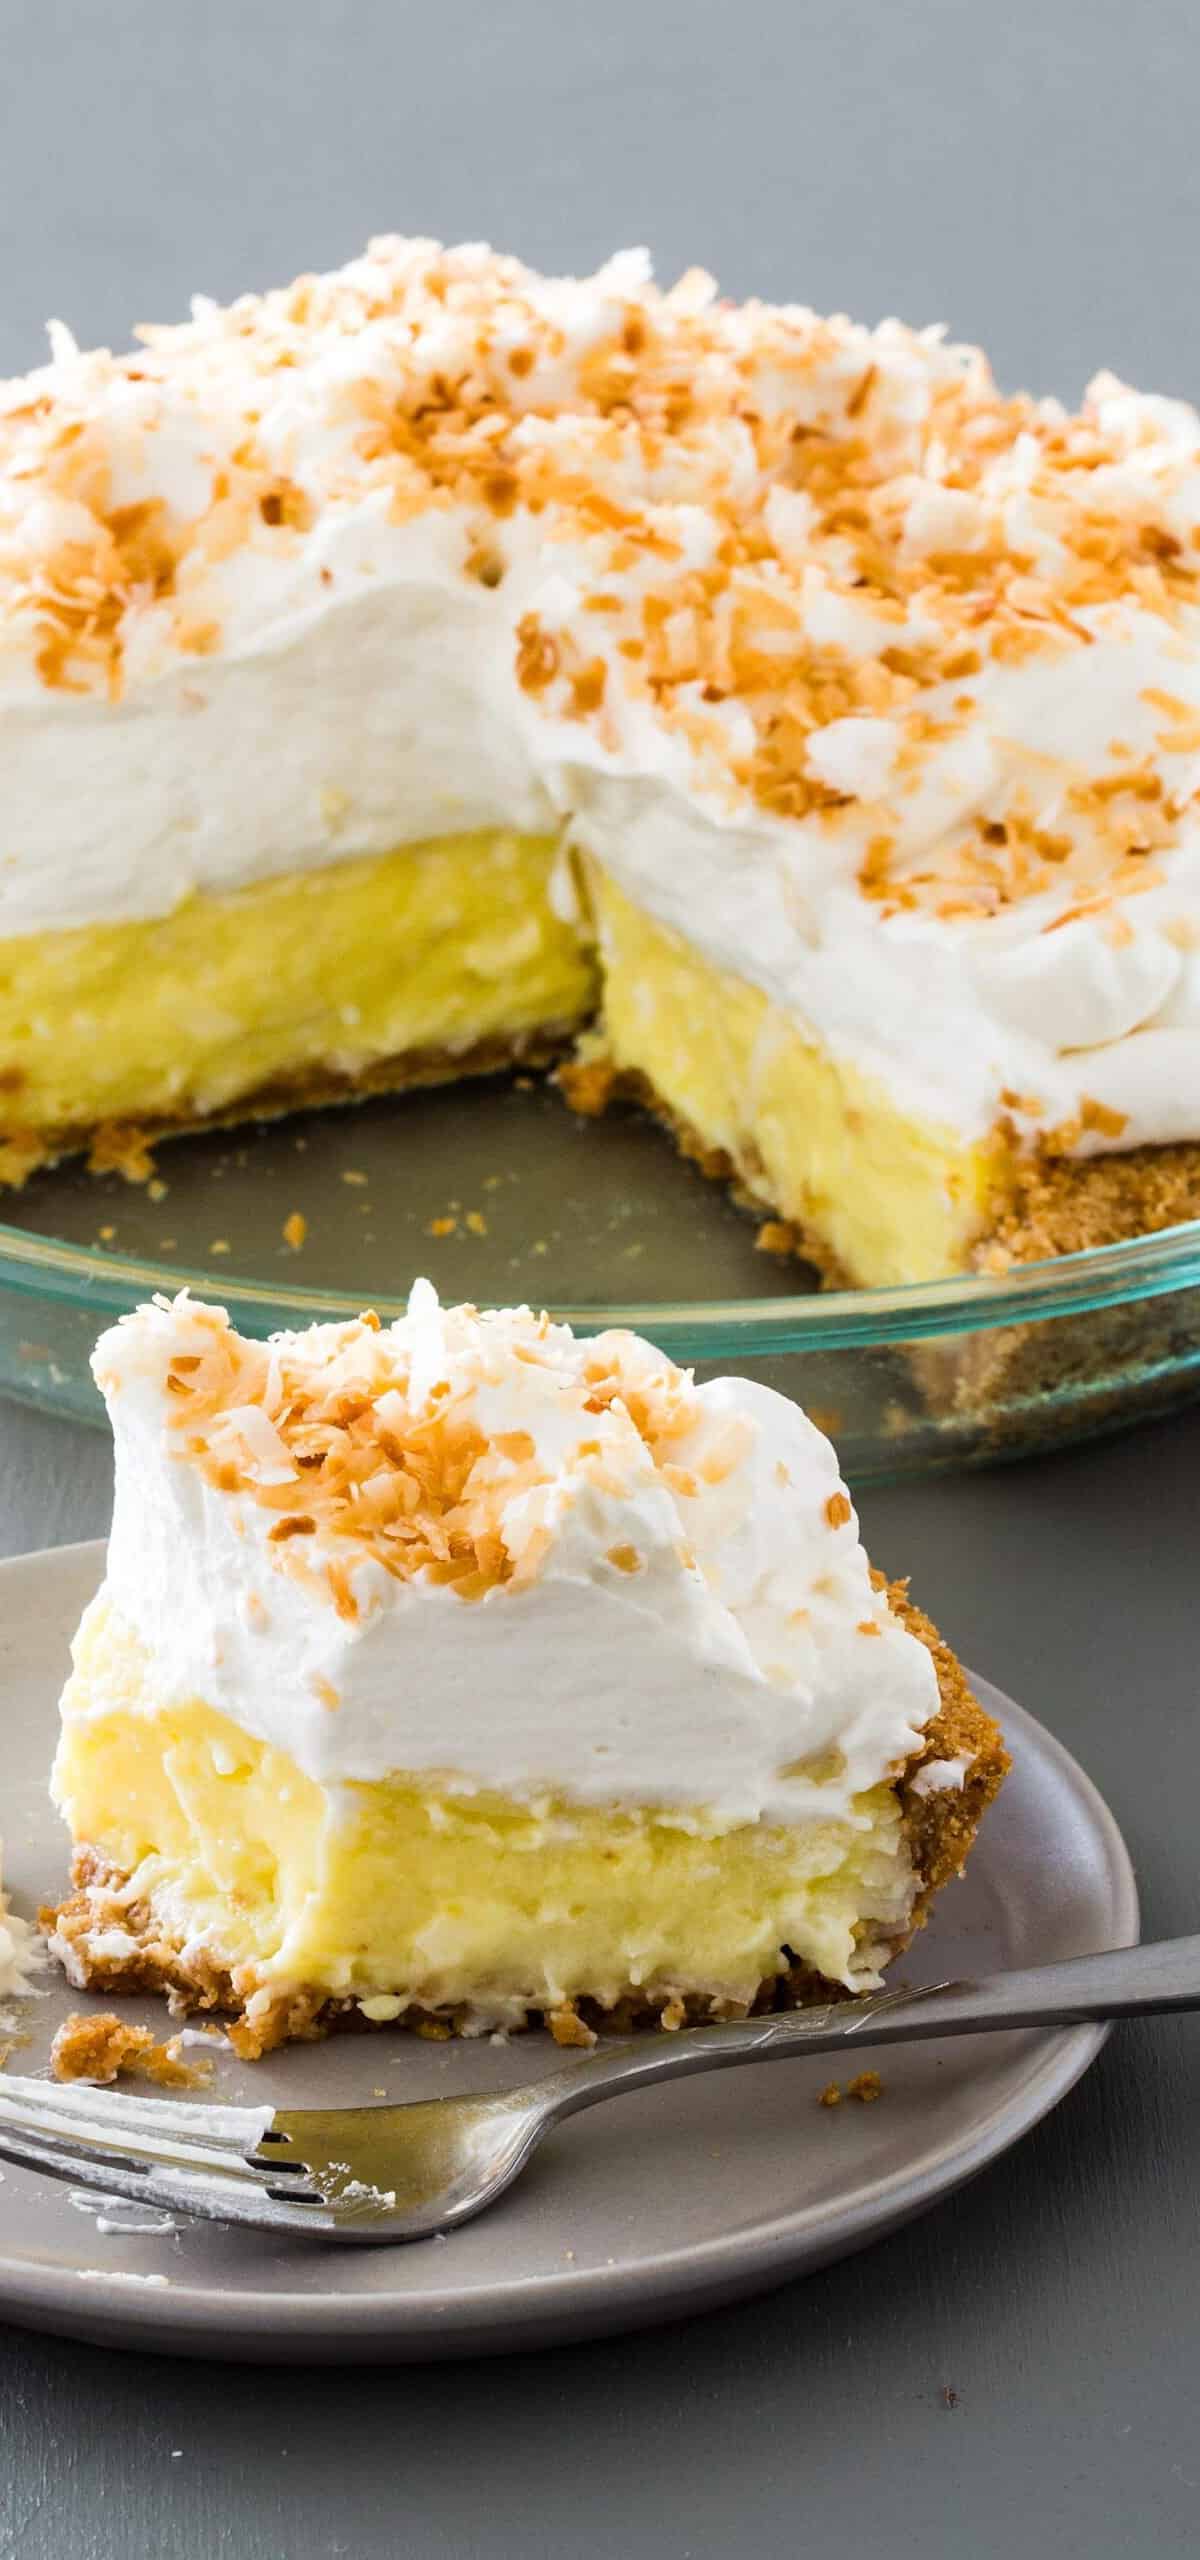  The toasted coconut garnish adds an irresistible aroma and an extra layer of flavor to the pie.